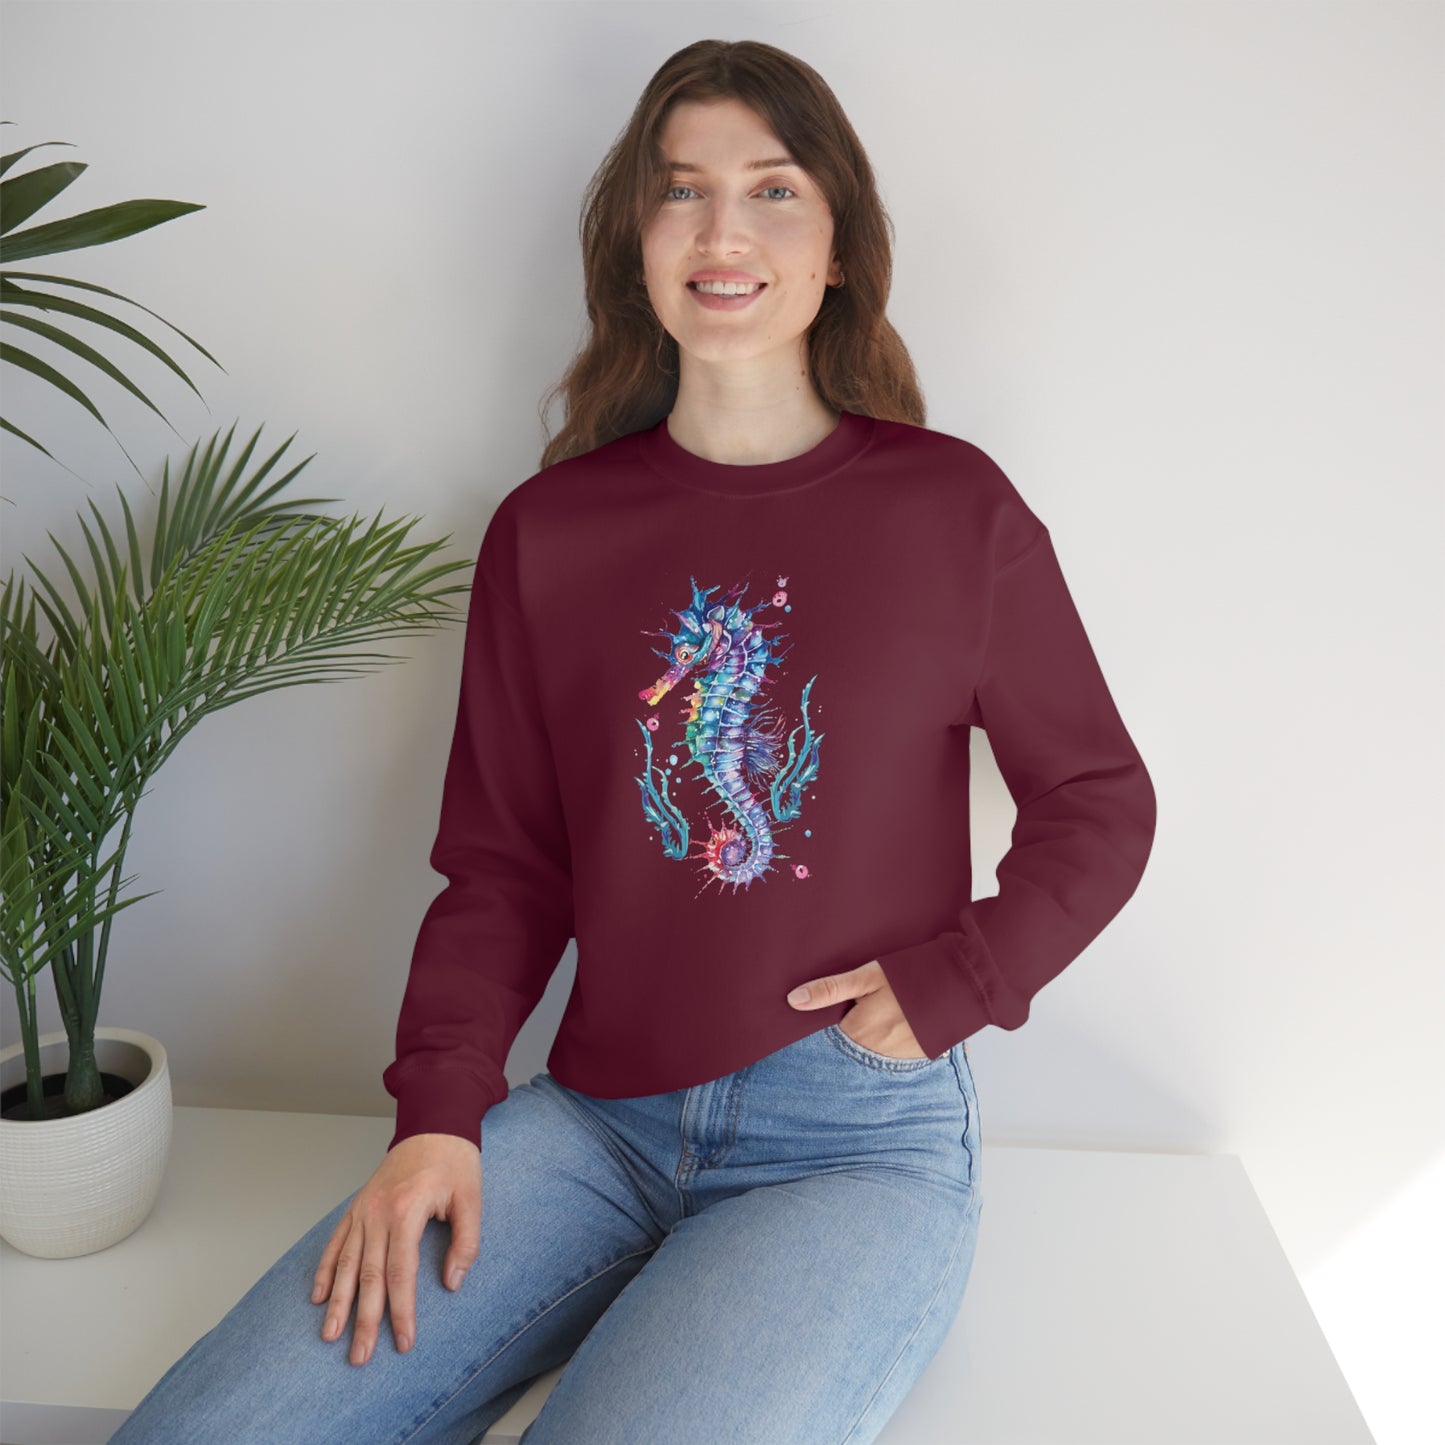 Mock up of a woman wearing the Maroon shirt